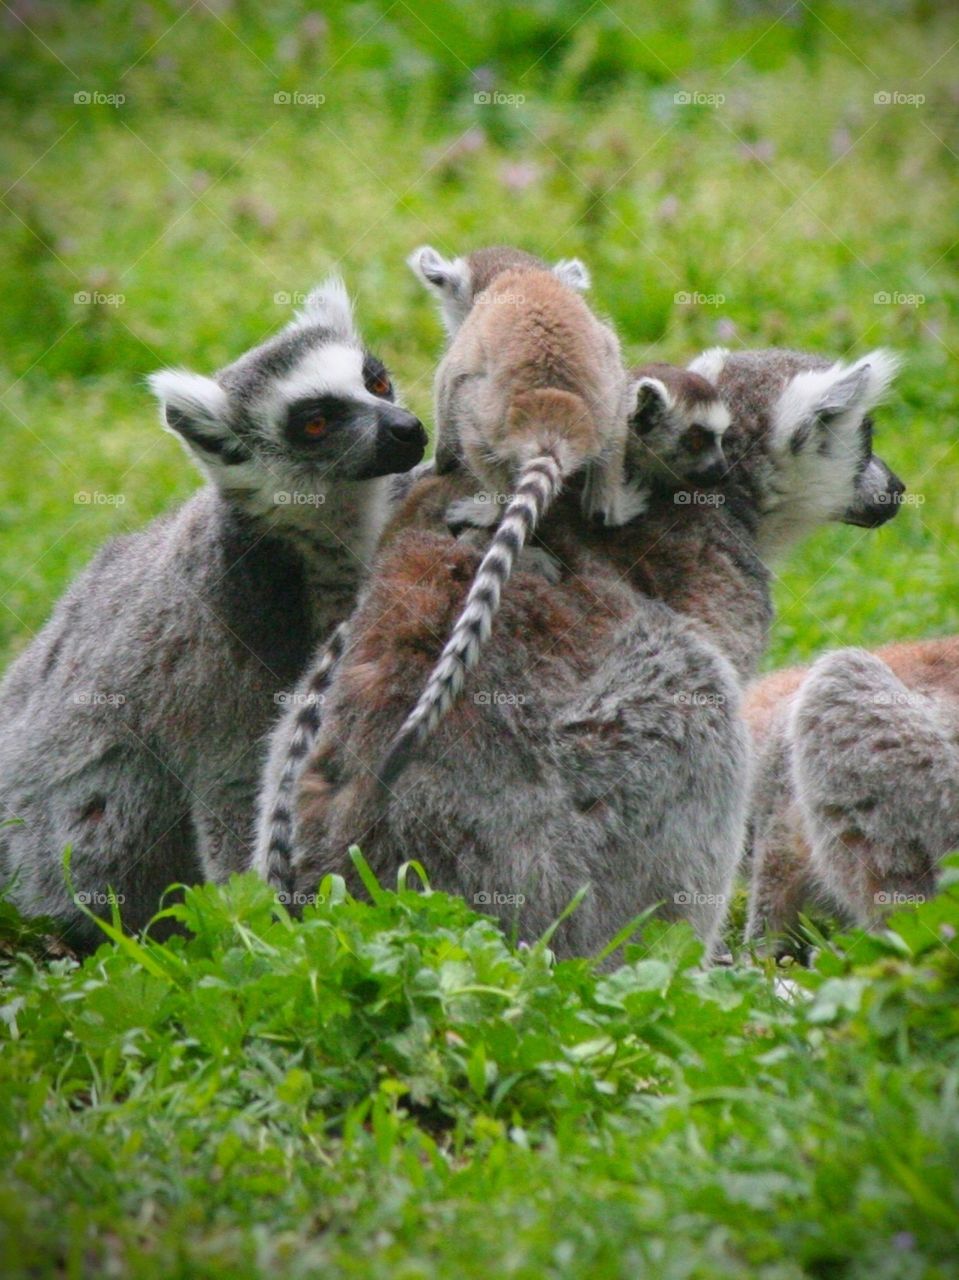 Cute and loving lemur family! And nie I have a riddle for you: how many animals do you see in this picture?